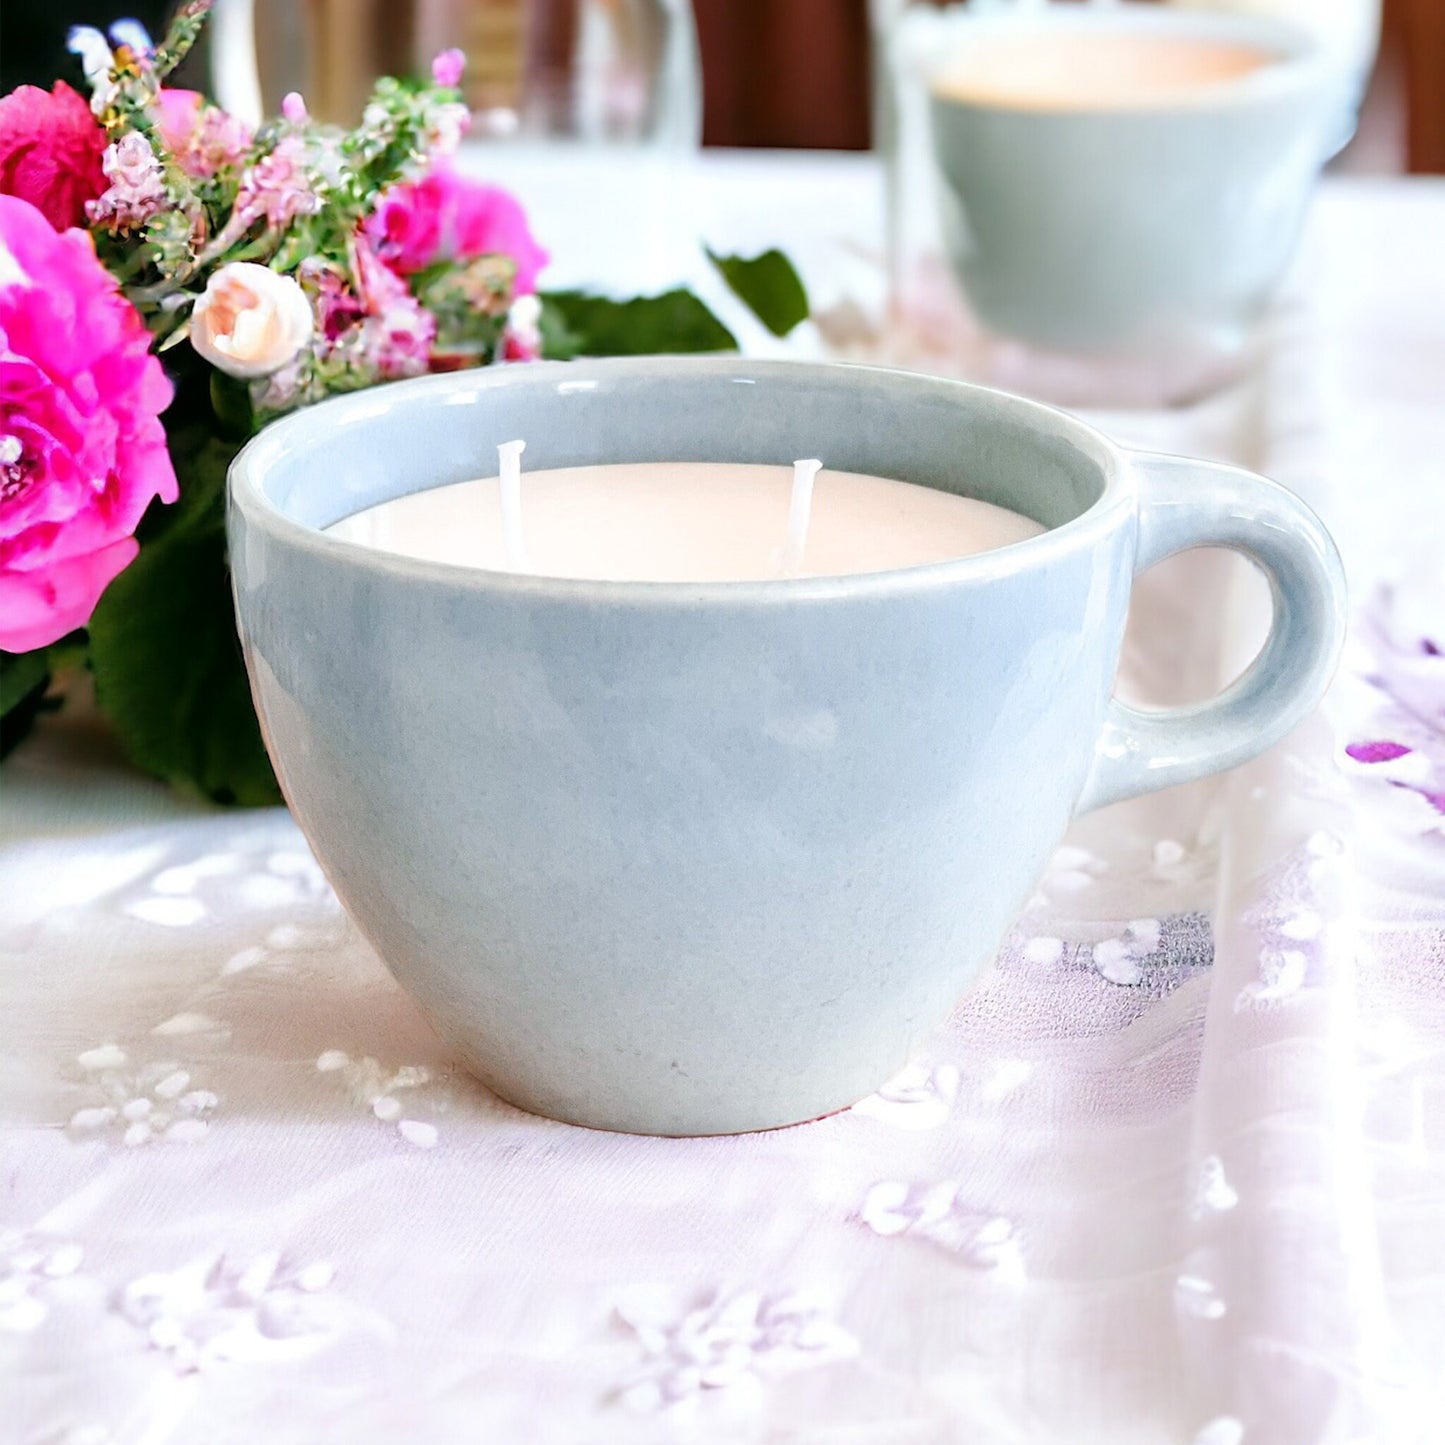 Soy Candle in Vintage Coffee Cup